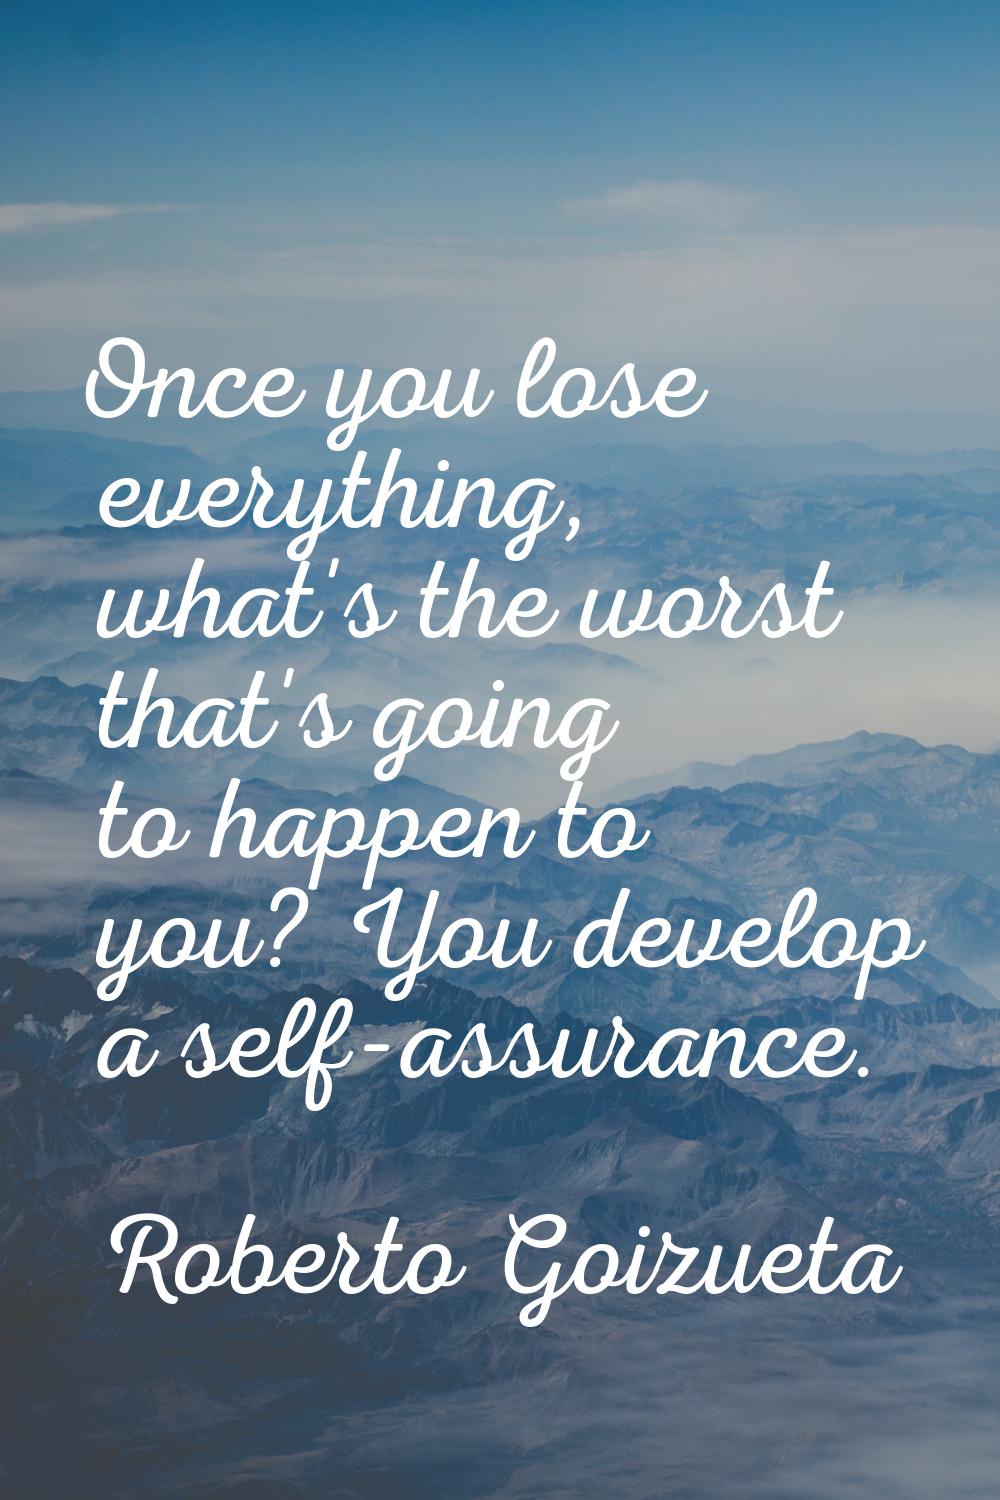 Once you lose everything, what's the worst that's going to happen to you? You develop a self-assura